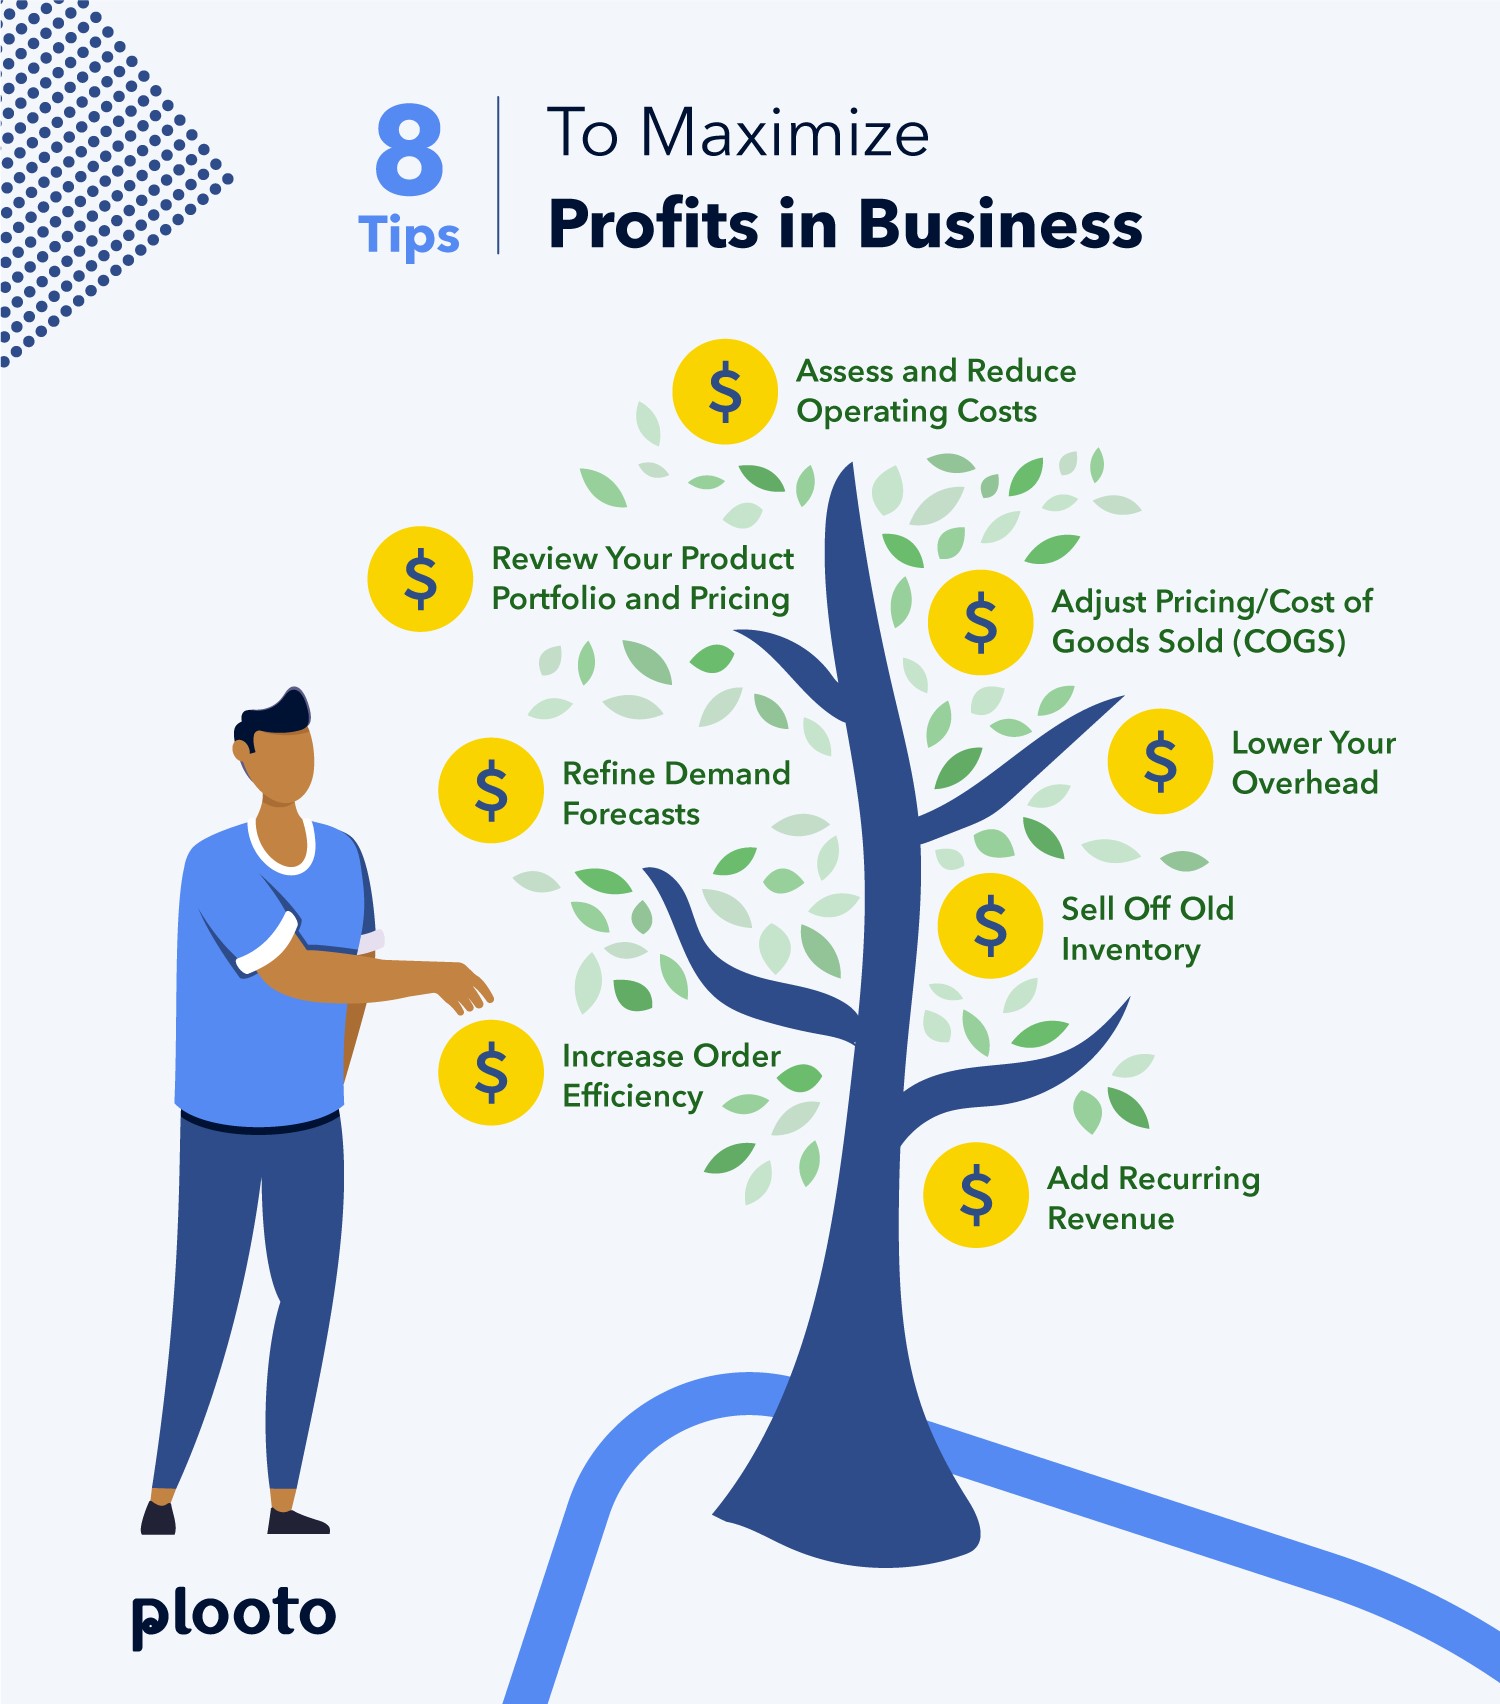 8-Tips-to-Maximize-Profits-in-Business (1)